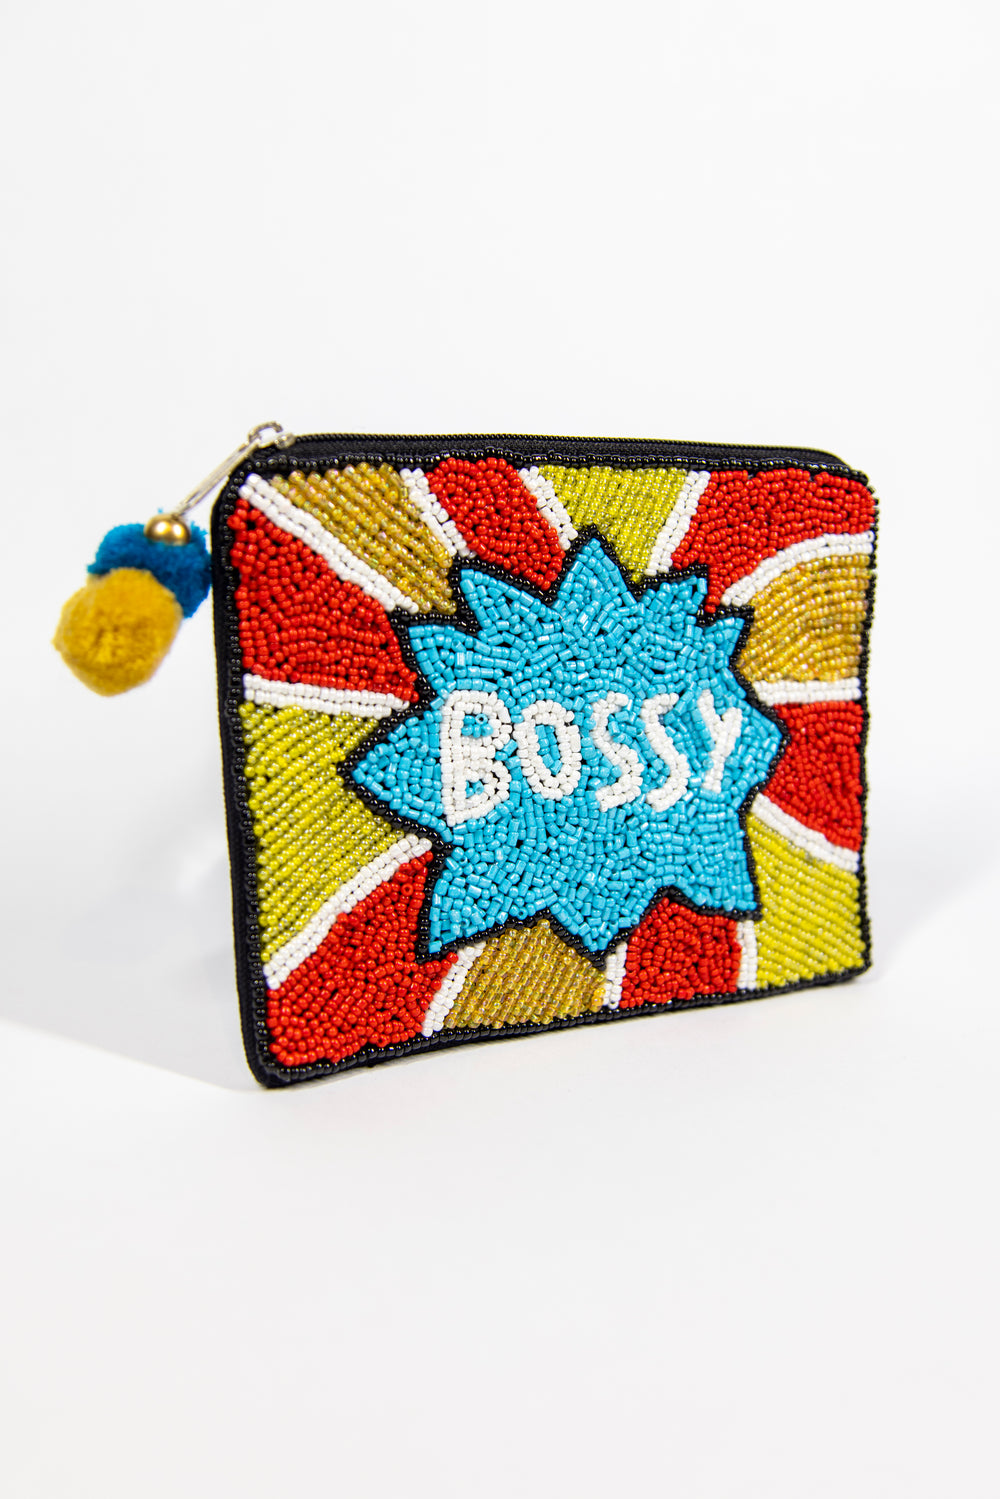 Bossy Coin Purse